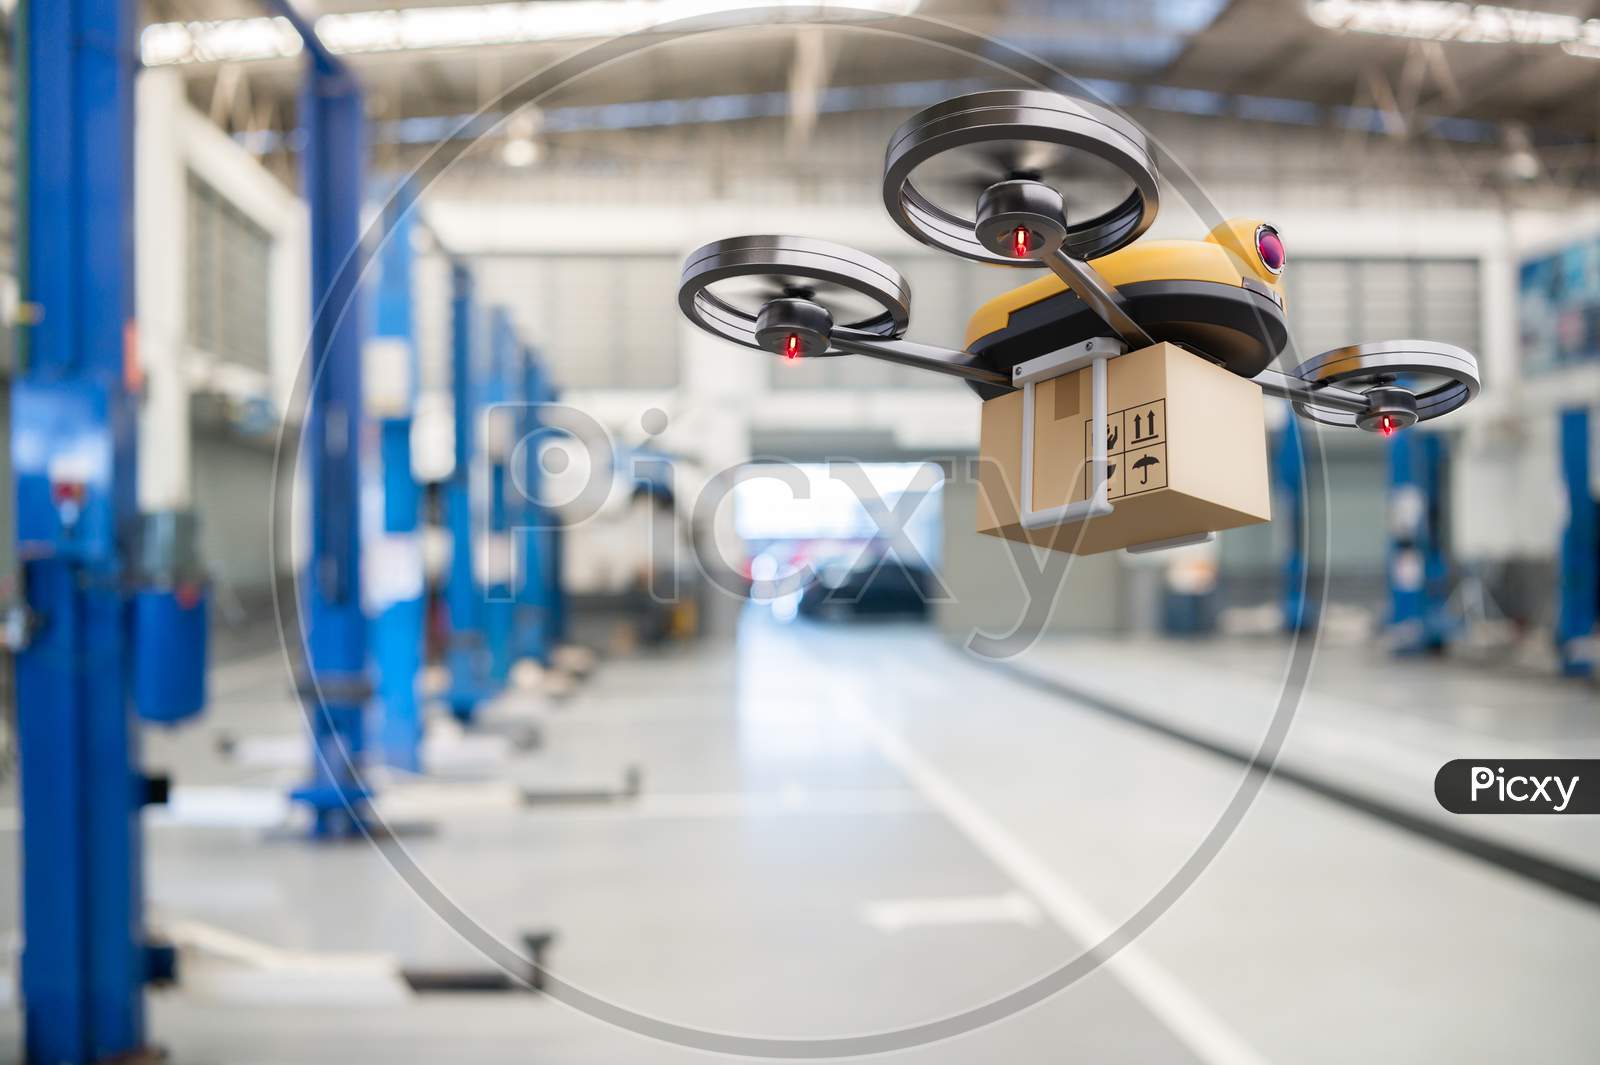 Spare Part Delivery Drone At Garage Storage In Leading Automotive Car Service Center For Delivering Mechanical Shipping Component Part Assembling To Customer. Modern Innovative Technology And Gadget